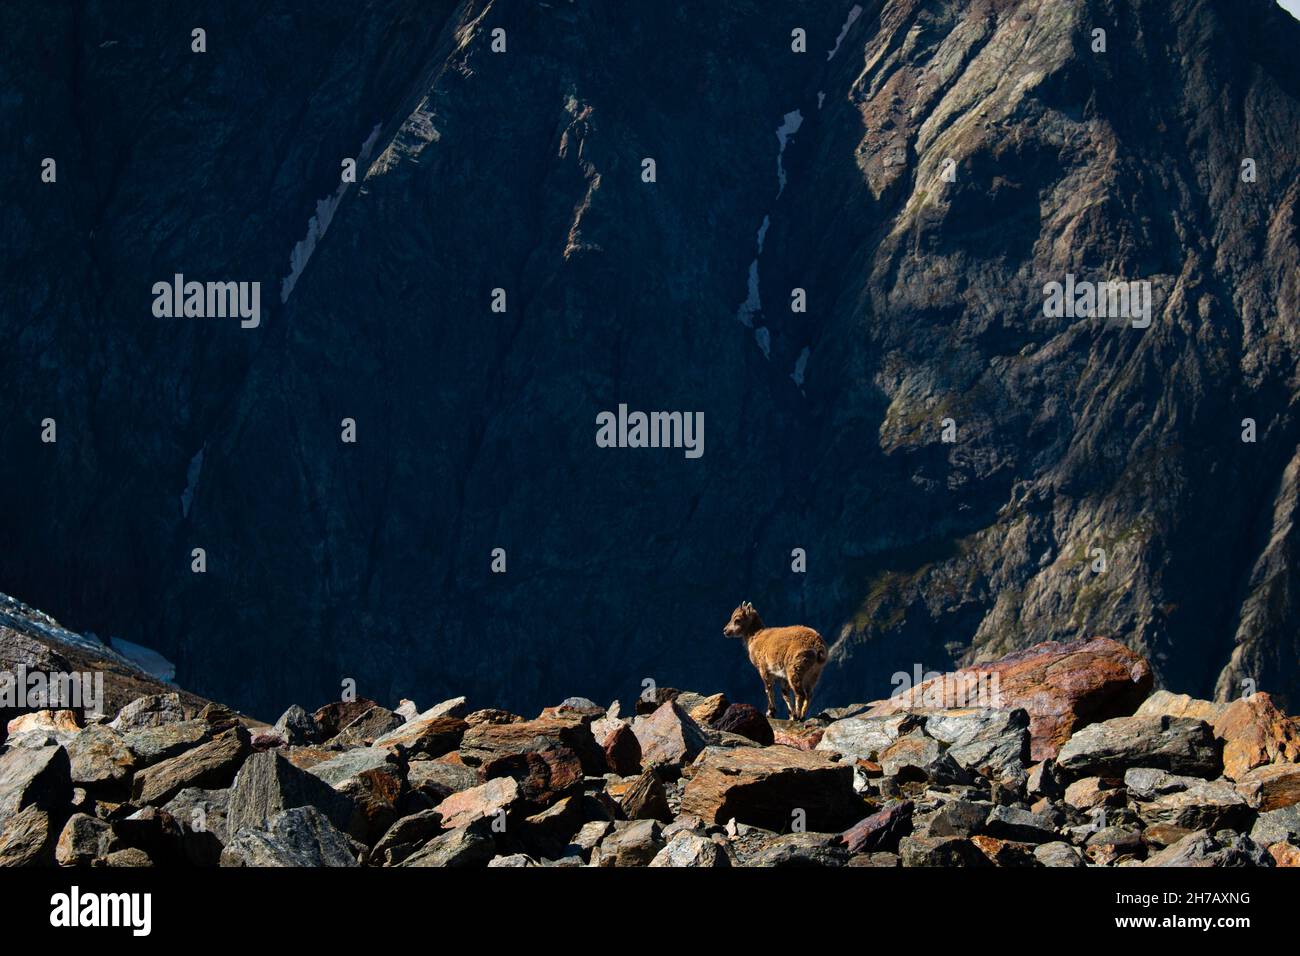 A tiny baby goat in French Alps near the hiking trail between Nid d'Aigle and Refuge de Tete Rousse, Massif du Mont Blanc, September, France Stock Photo